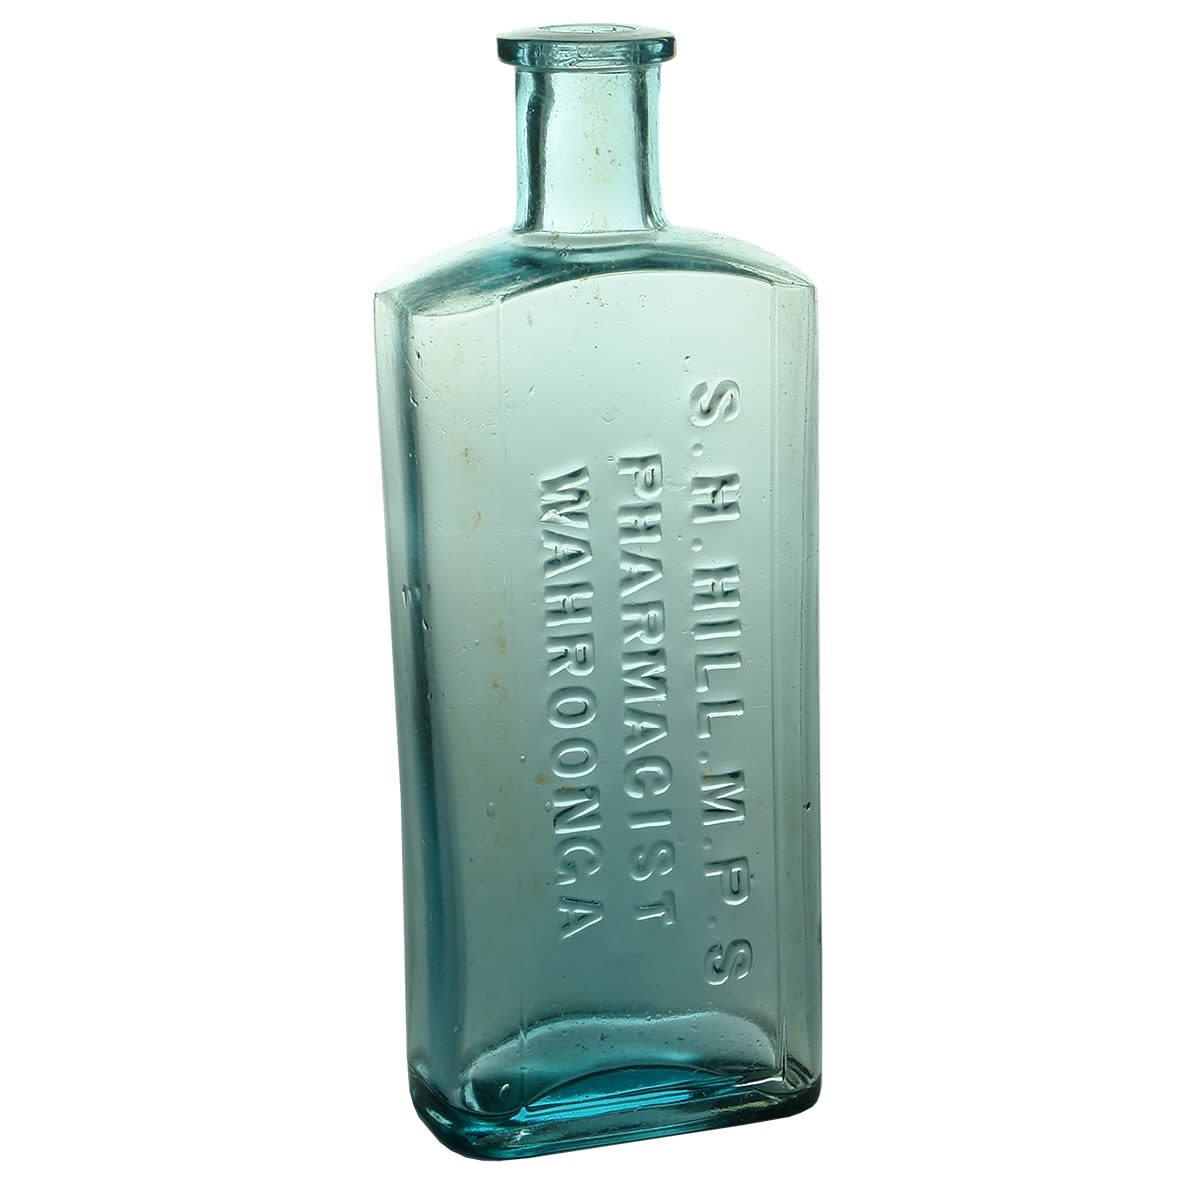 Chemist. S. H. Hill. M. P. S., Wahroonga. Ice Blue. 8 oz. (New South Wales)